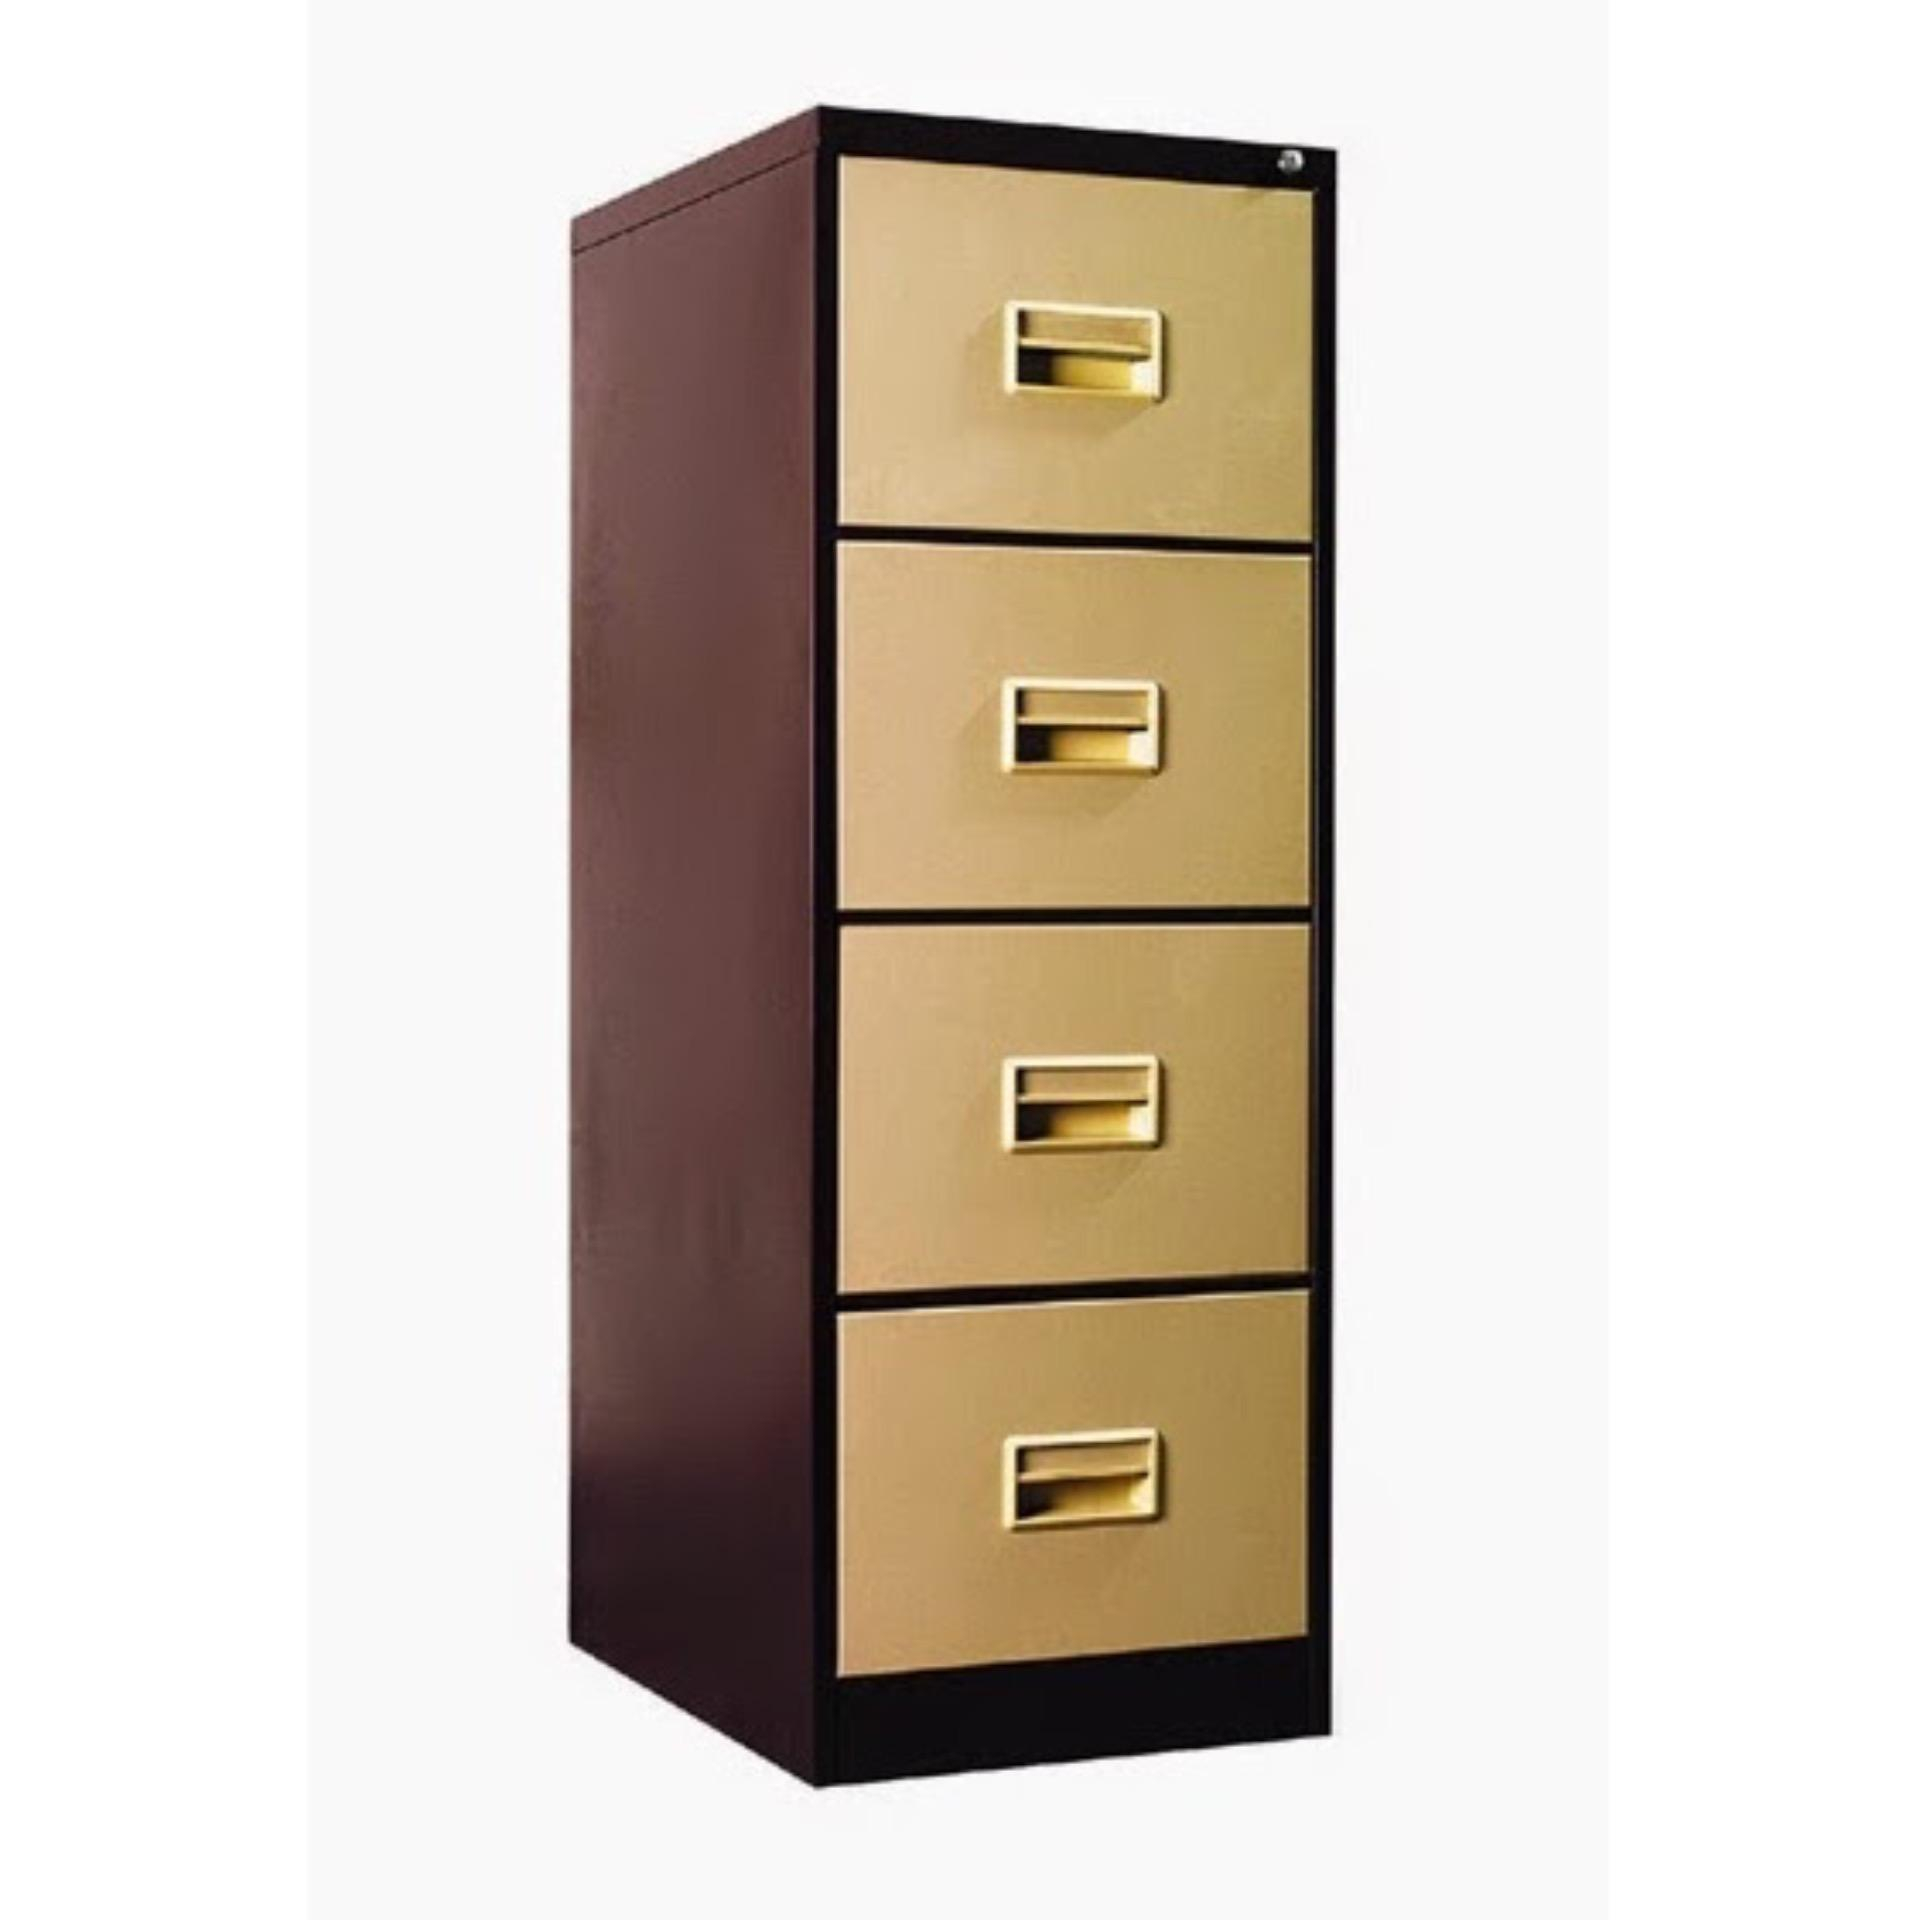 4 Drawer Metal Filing Cabinet Dark End 4282021 1200 Am intended for size 1920 X 1920